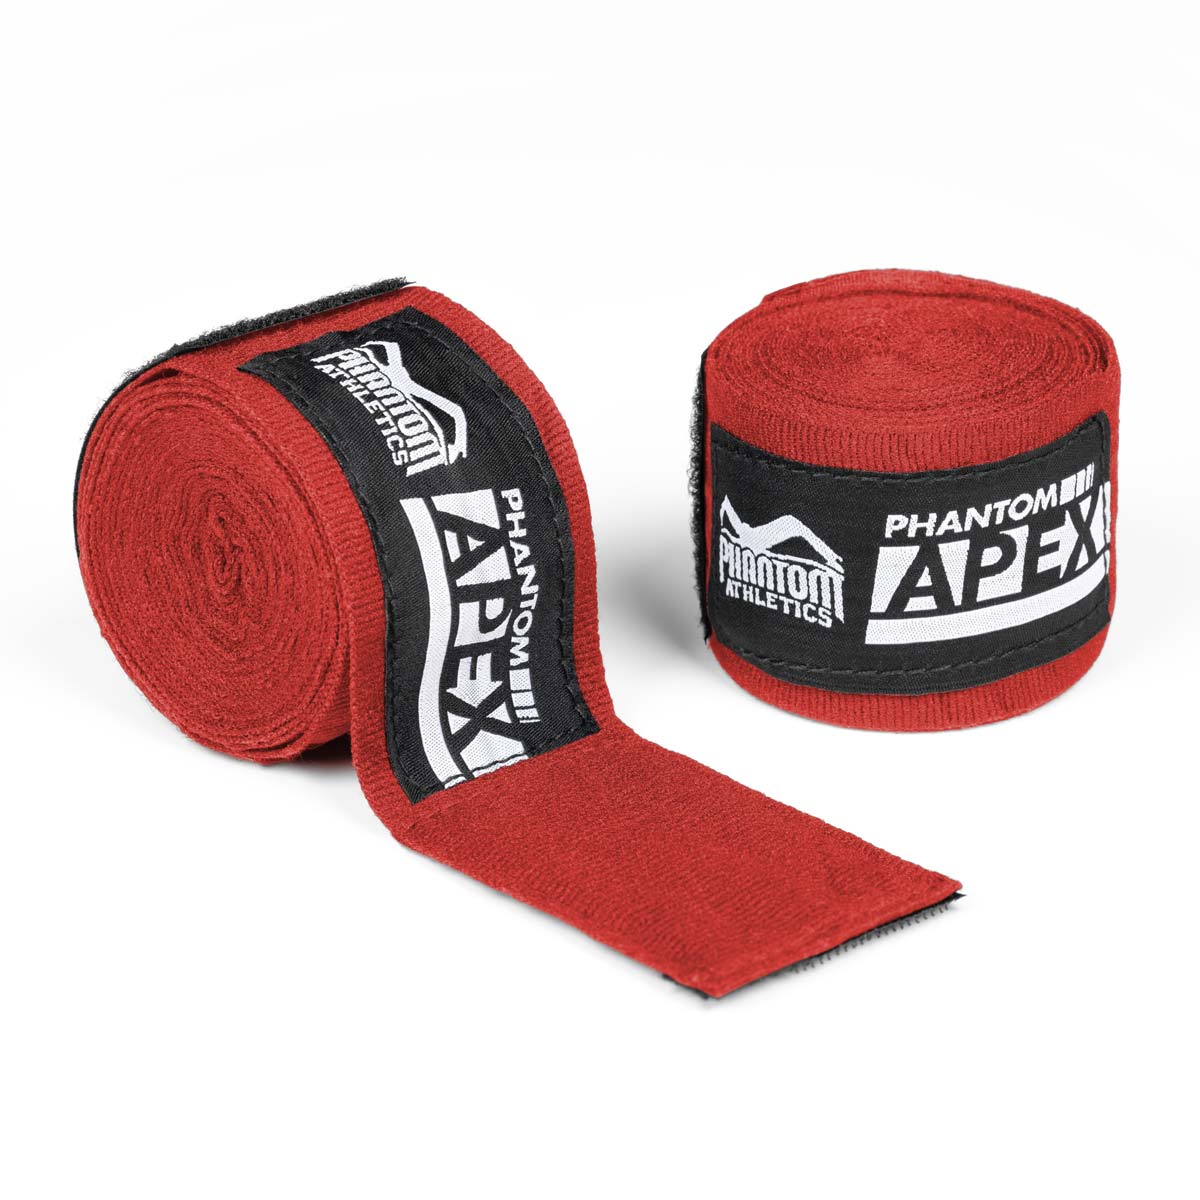 Phantom boxing bandages for martial arts training and competition. In the color red and in 2 different lengths. Semi-elastic for maximum support and comfort.